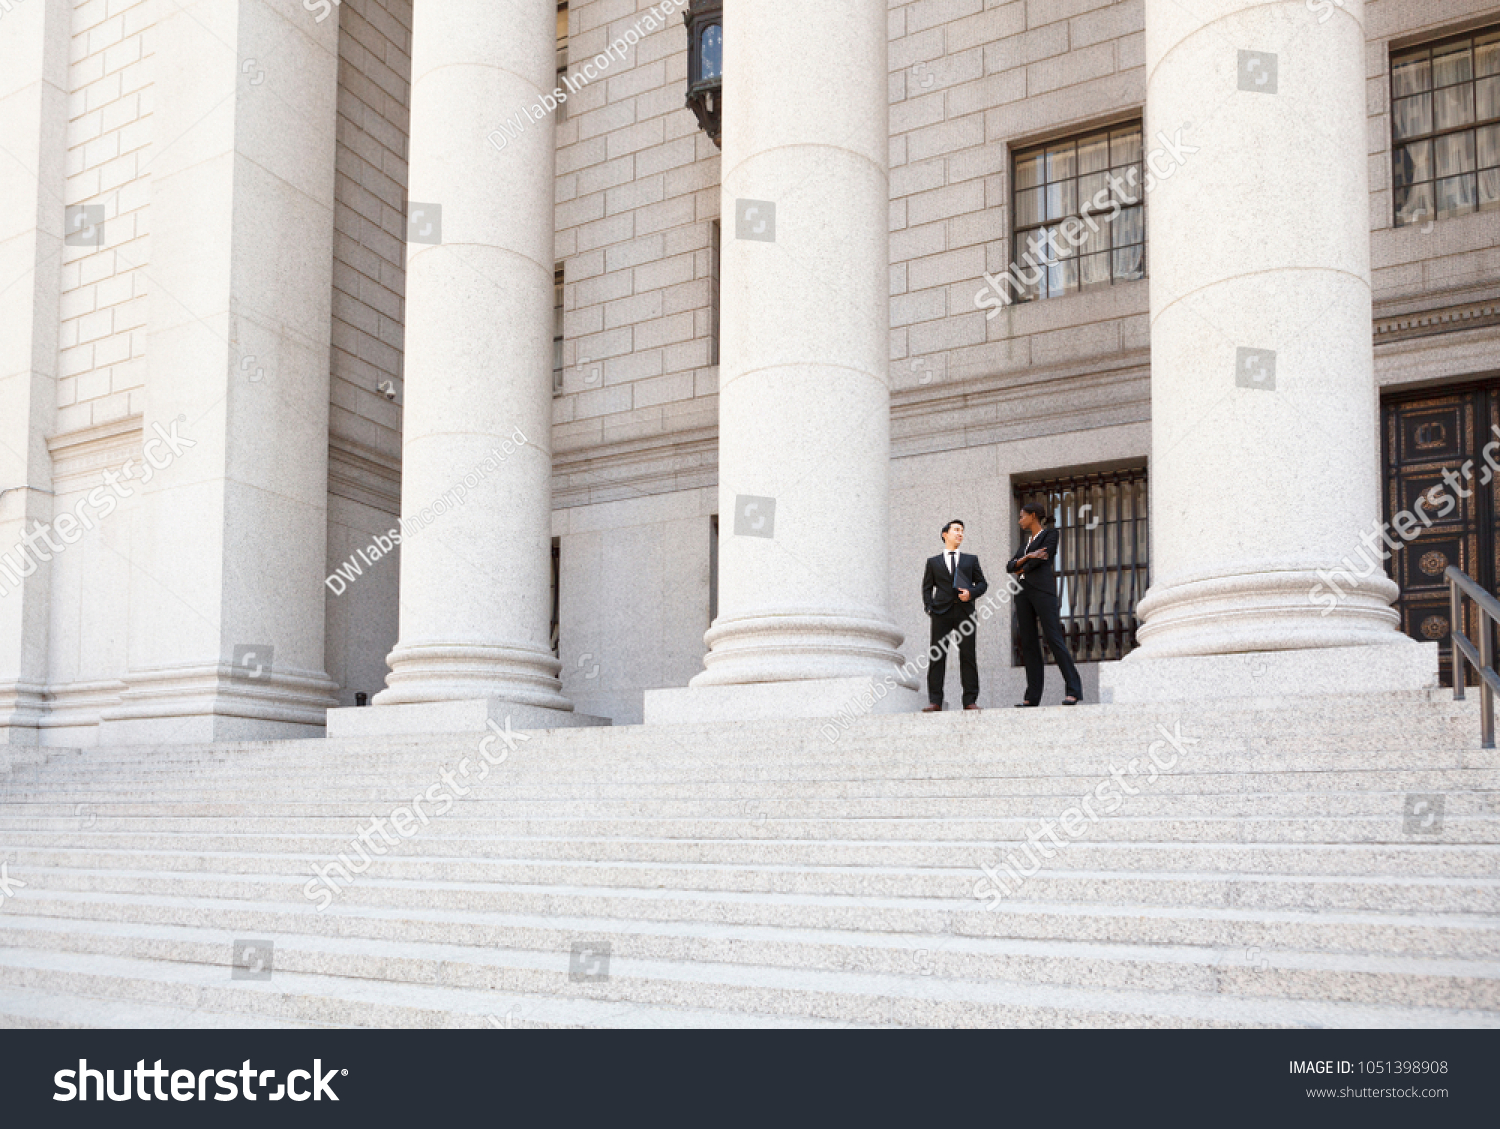 A well dressed man and woman converse on the steps of a legal or municipal building. Could be business or legal professionals or lawyer and client. #1051398908